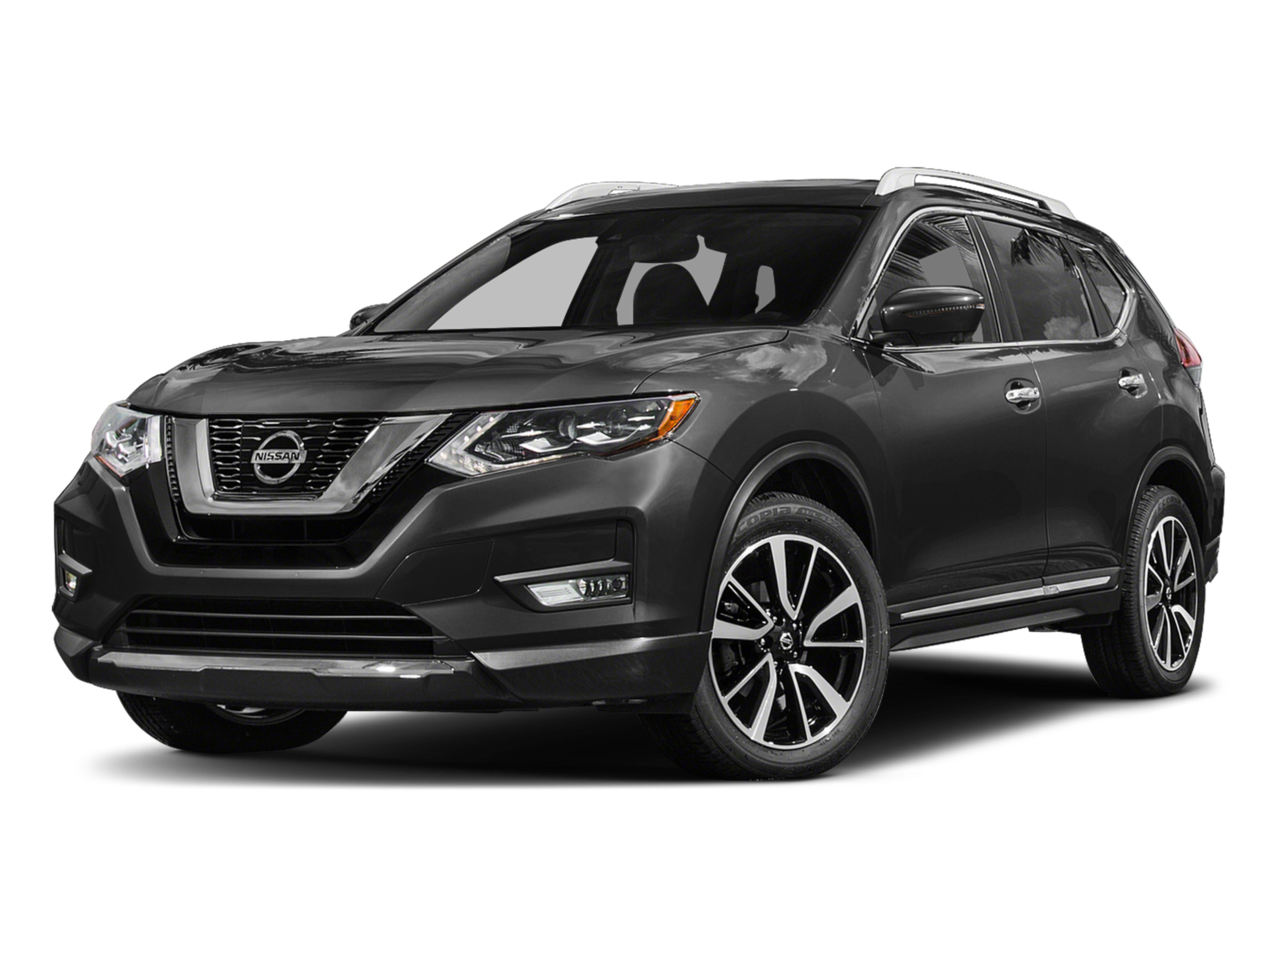 nissan-crossovers-and-suvs-nissan-of-silsbee-silsbee-tx